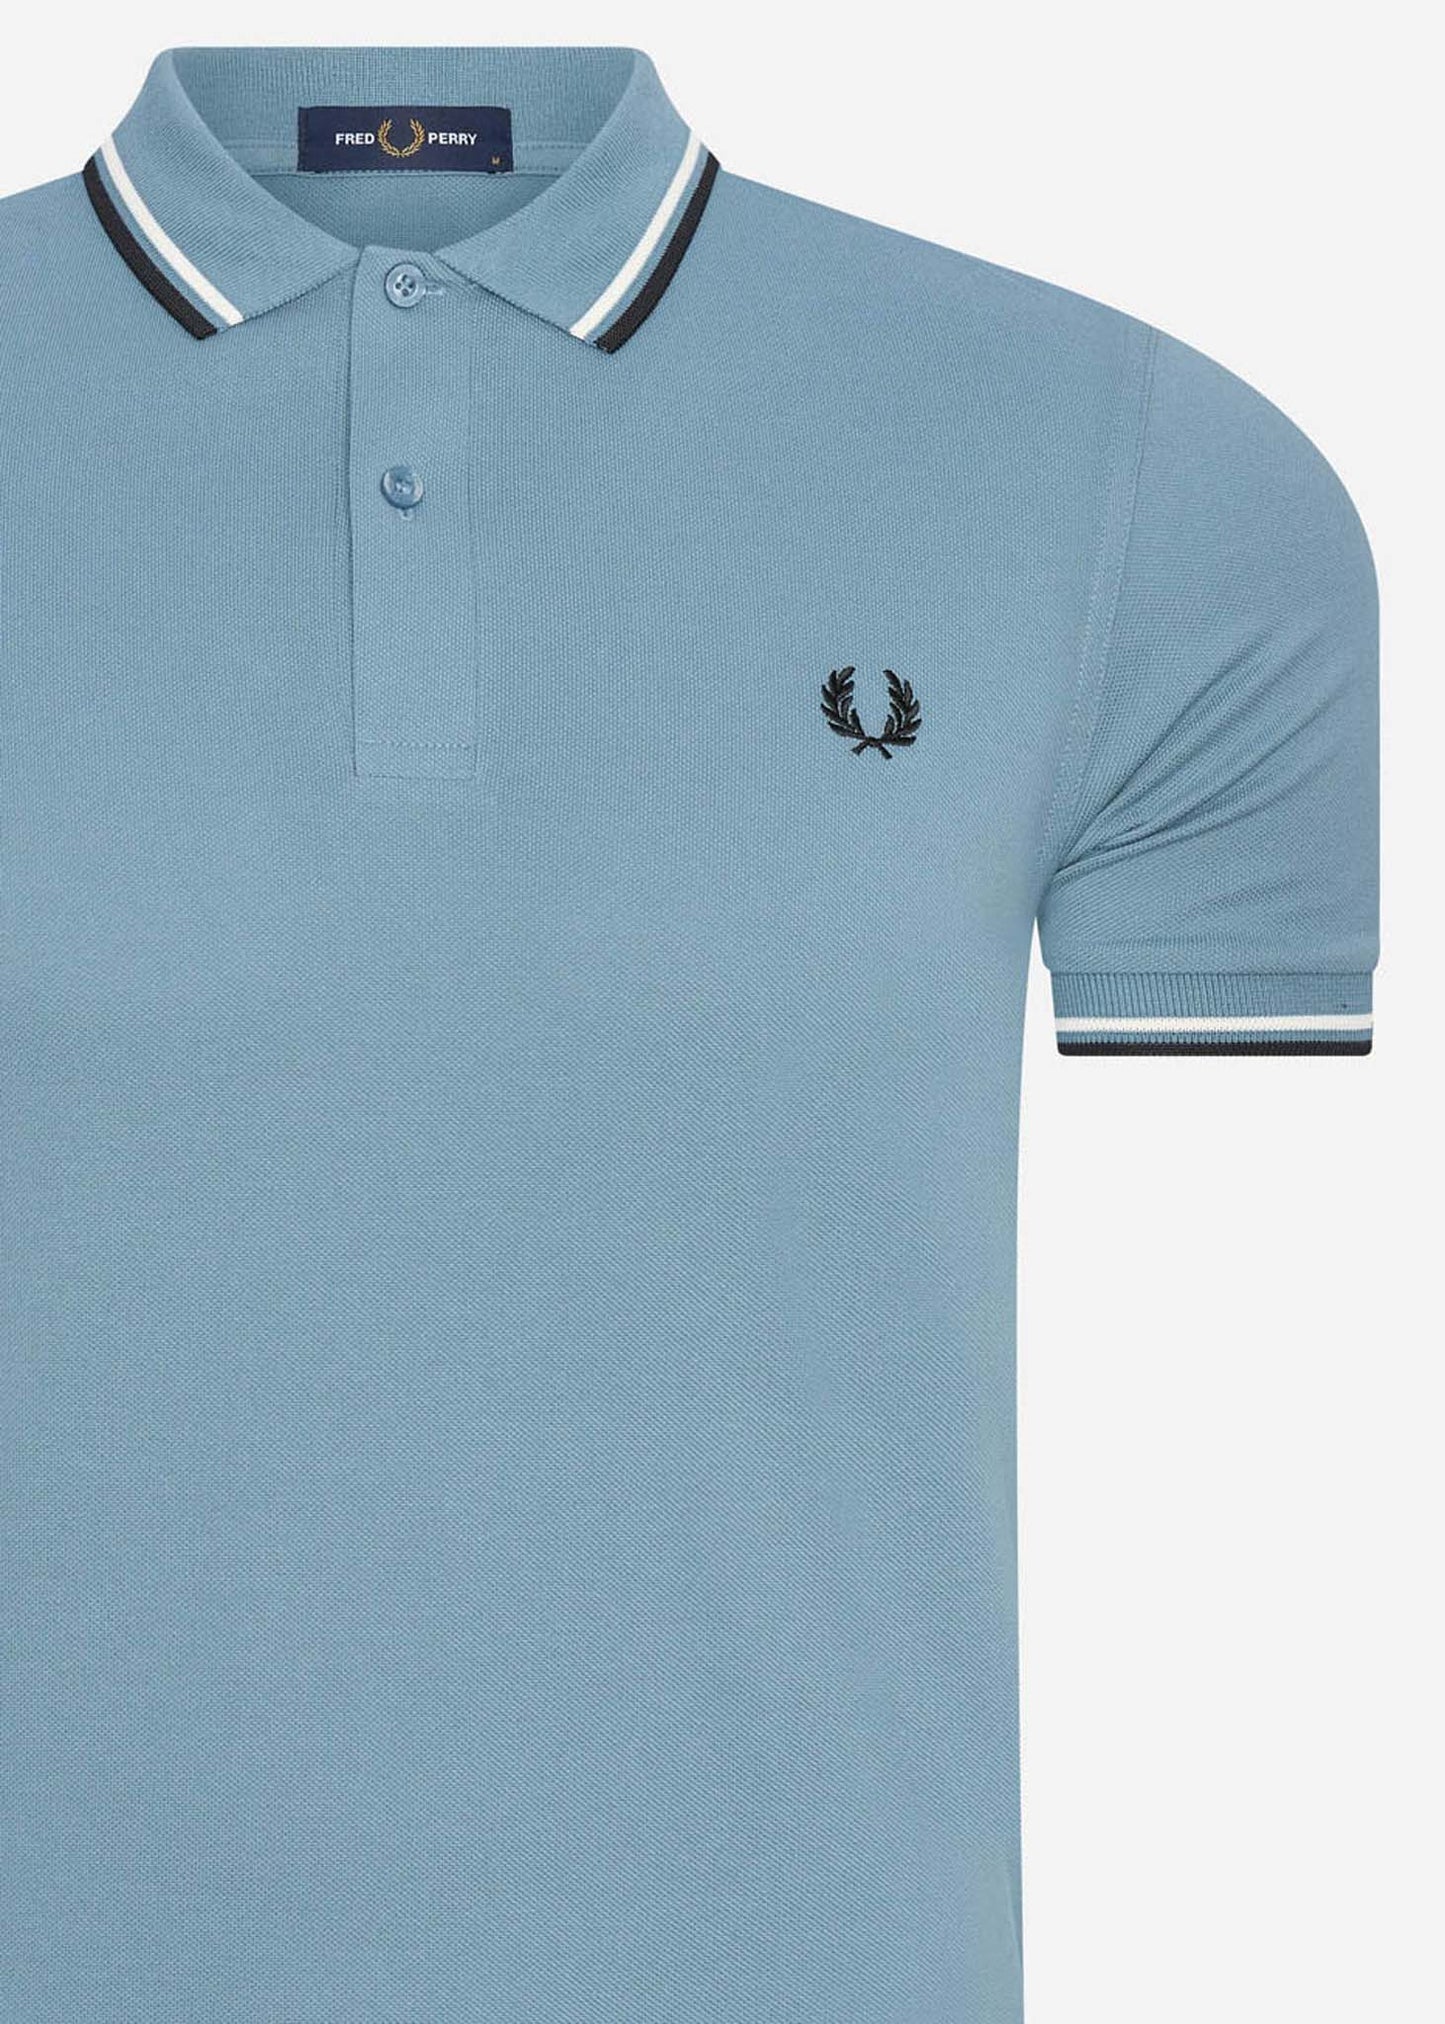 Twin tipped fred perry shirt - ash blue snow black